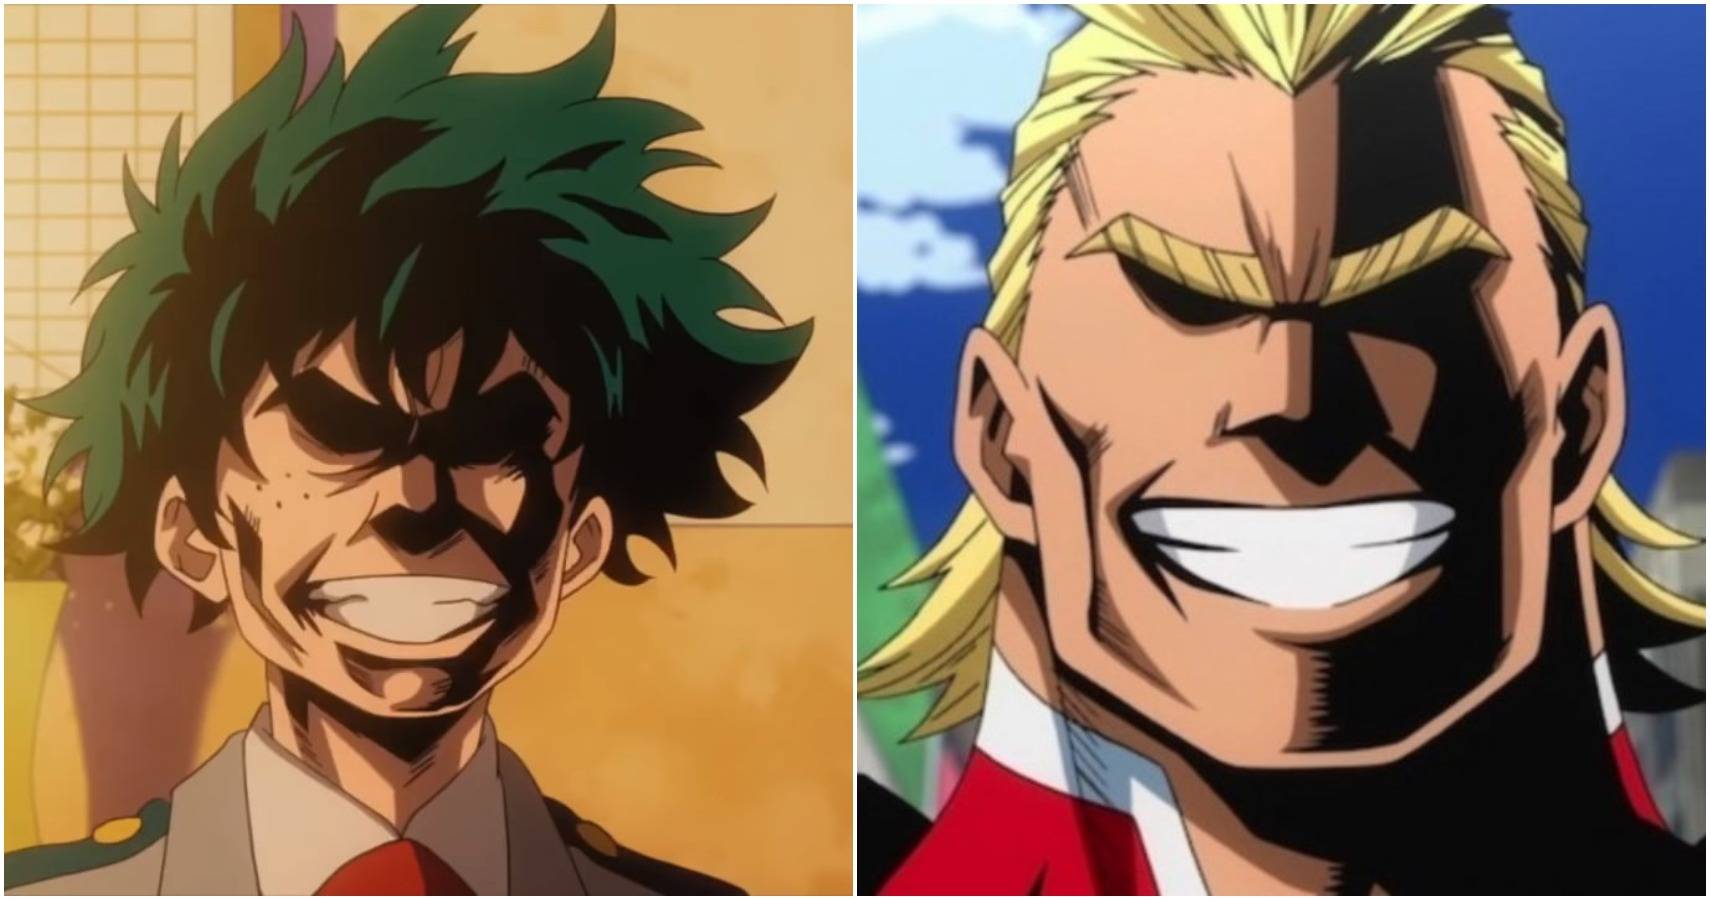 Deku and all might